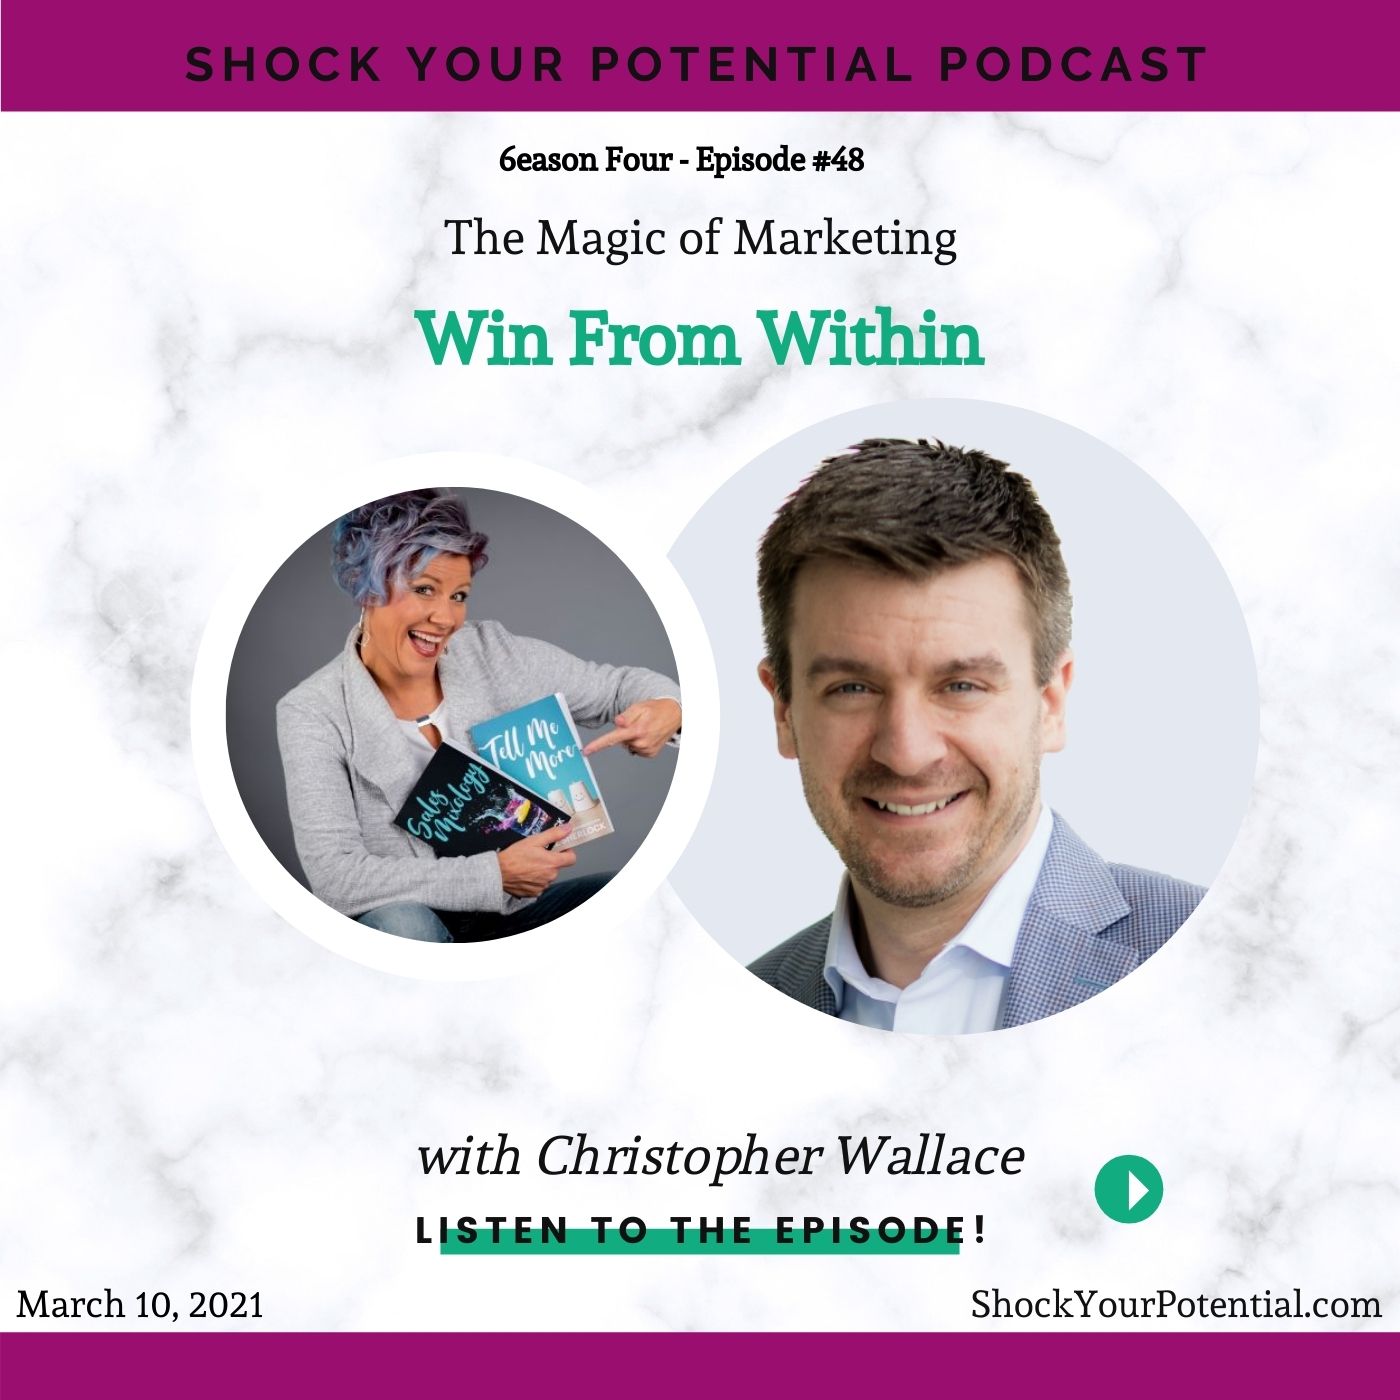 Win From Within – Christopher Wallace